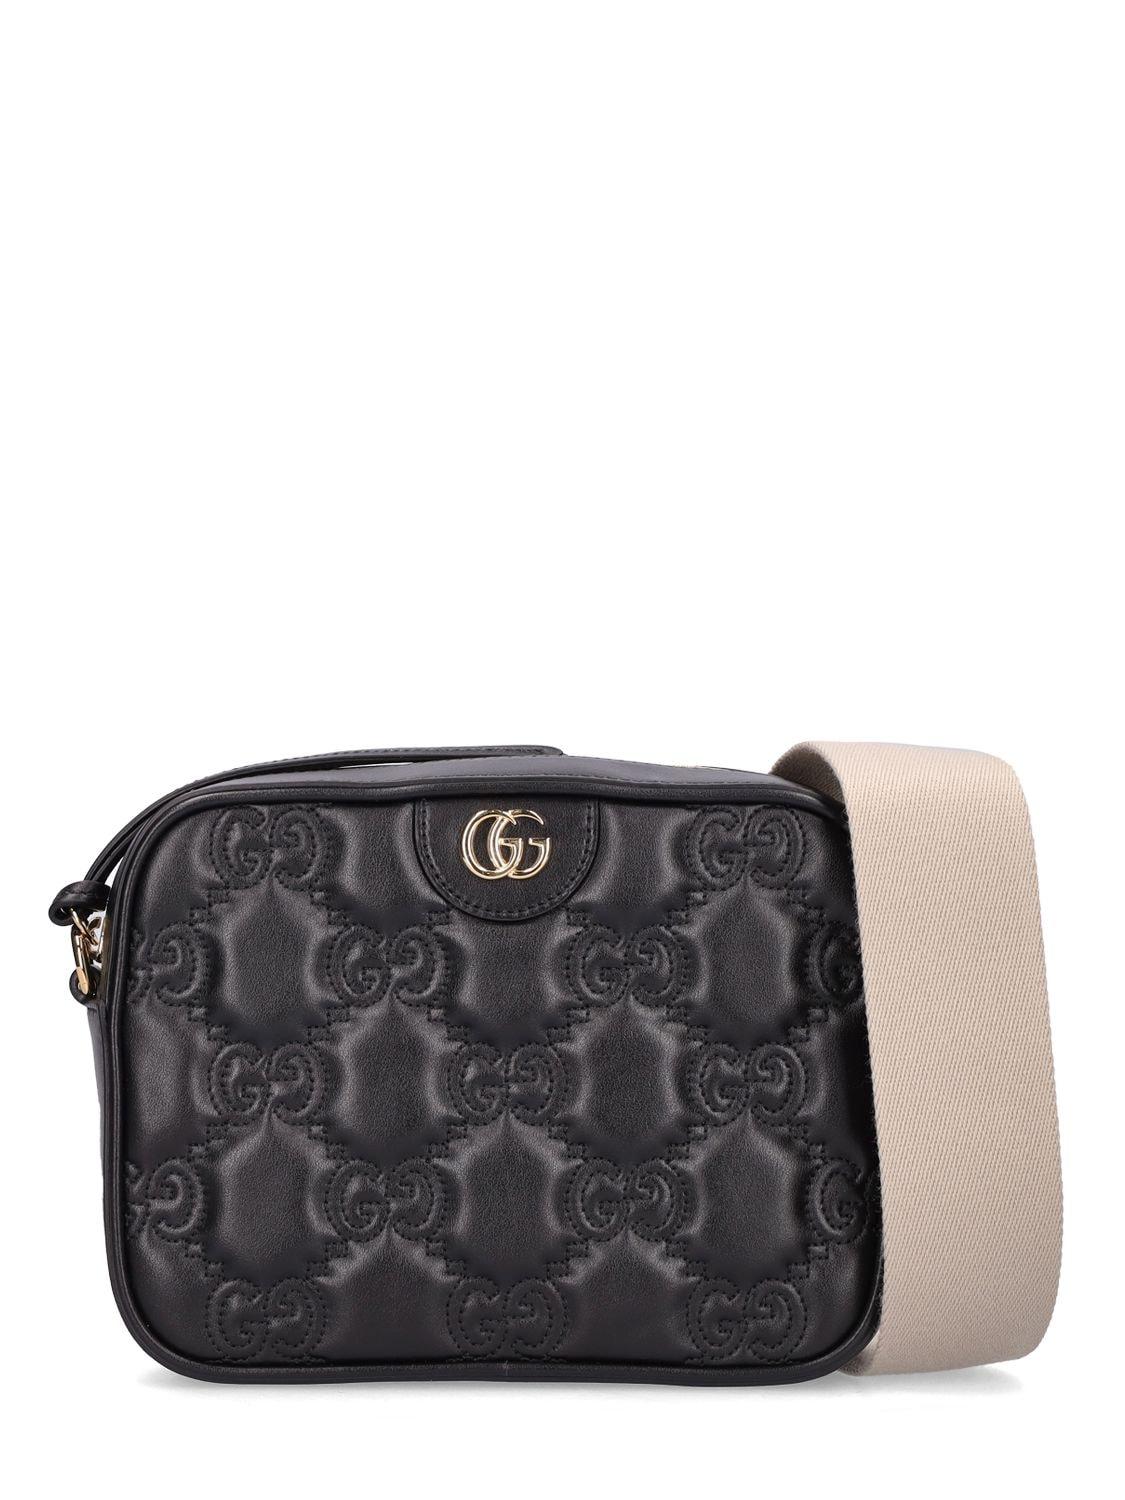 Prada Quilted leather camera bag $990